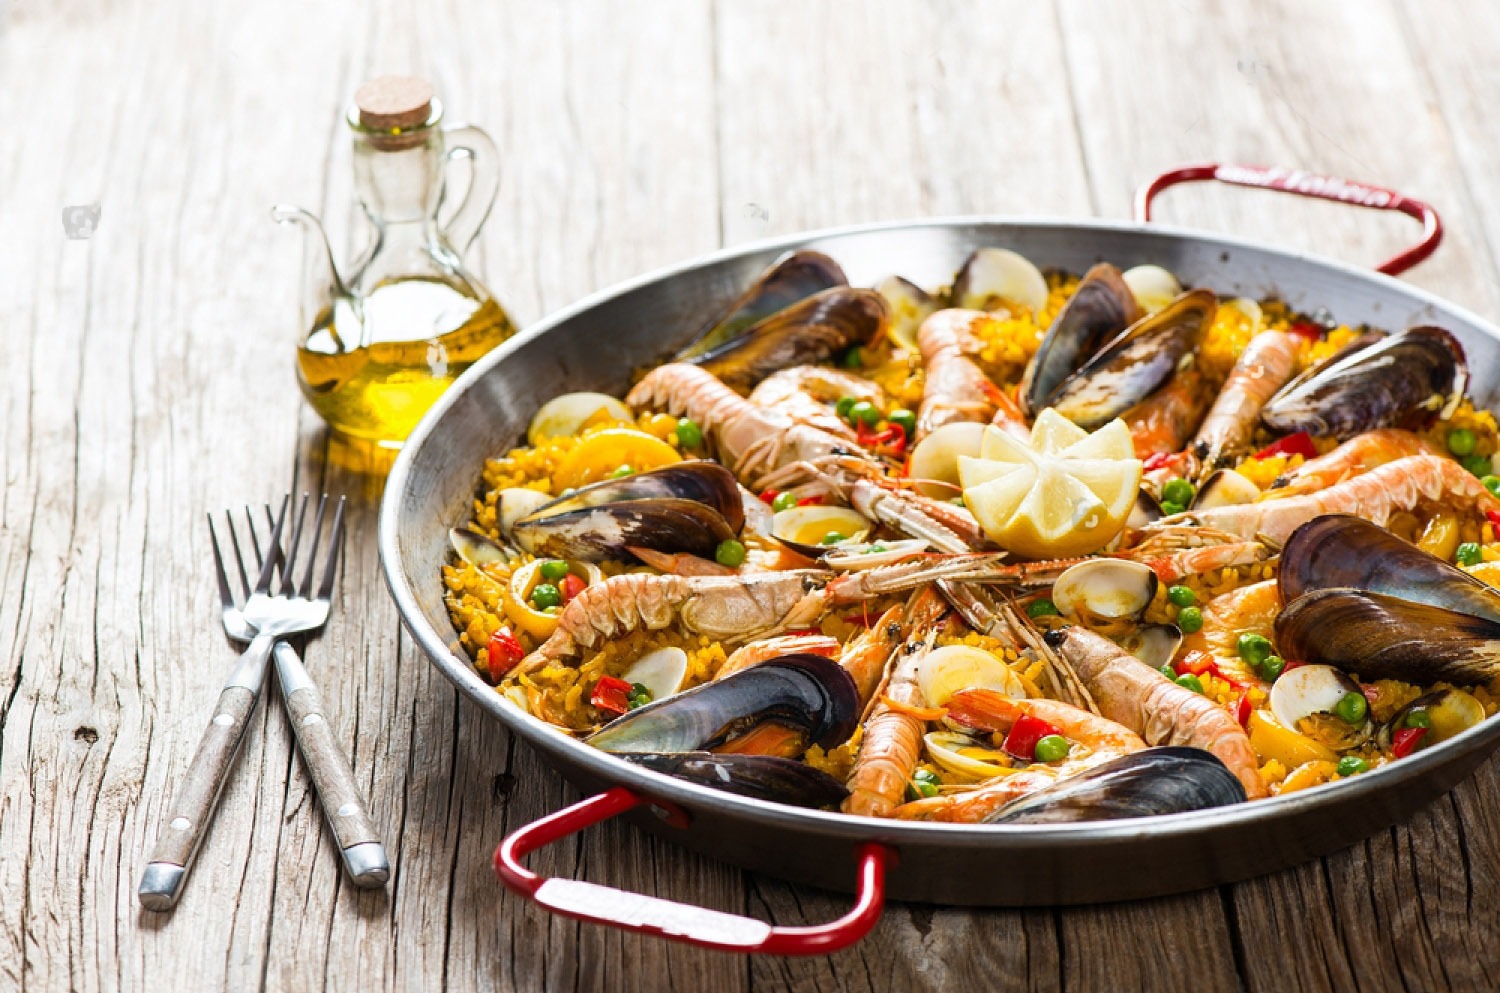 vegetable paella with seafood